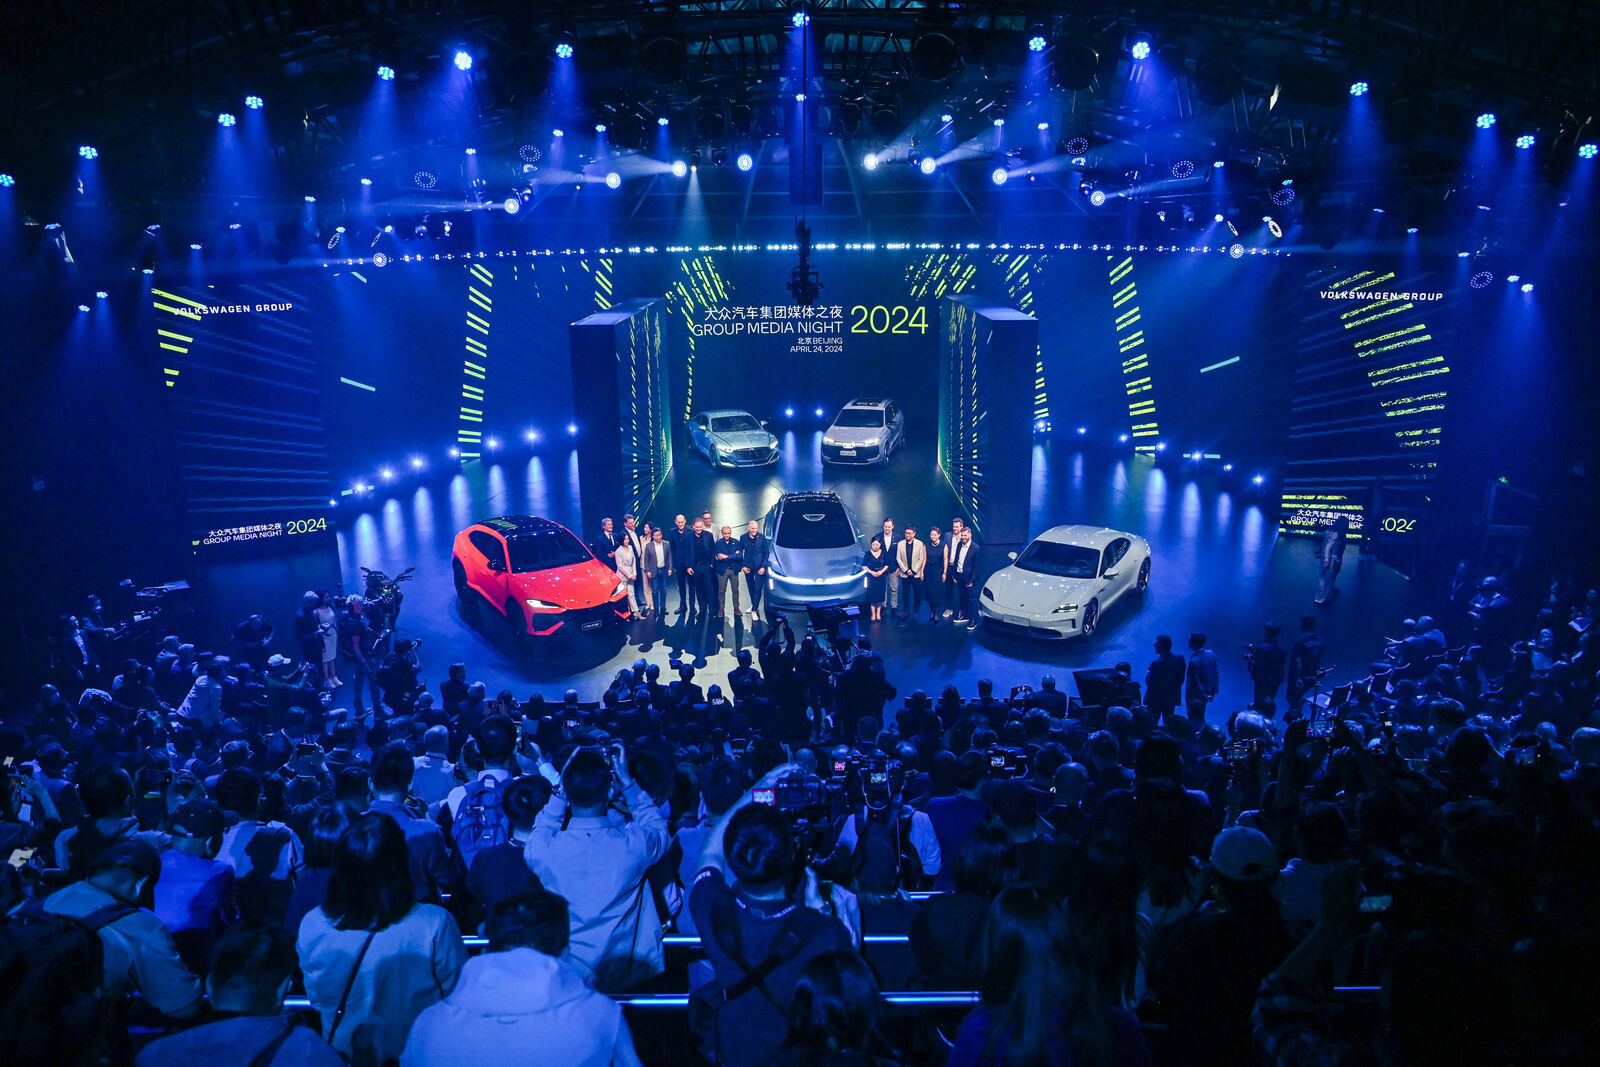 A large crowd attends a "Group Media Night 2024" event featuring several high-end cars displayed on stage under bright blue lighting.